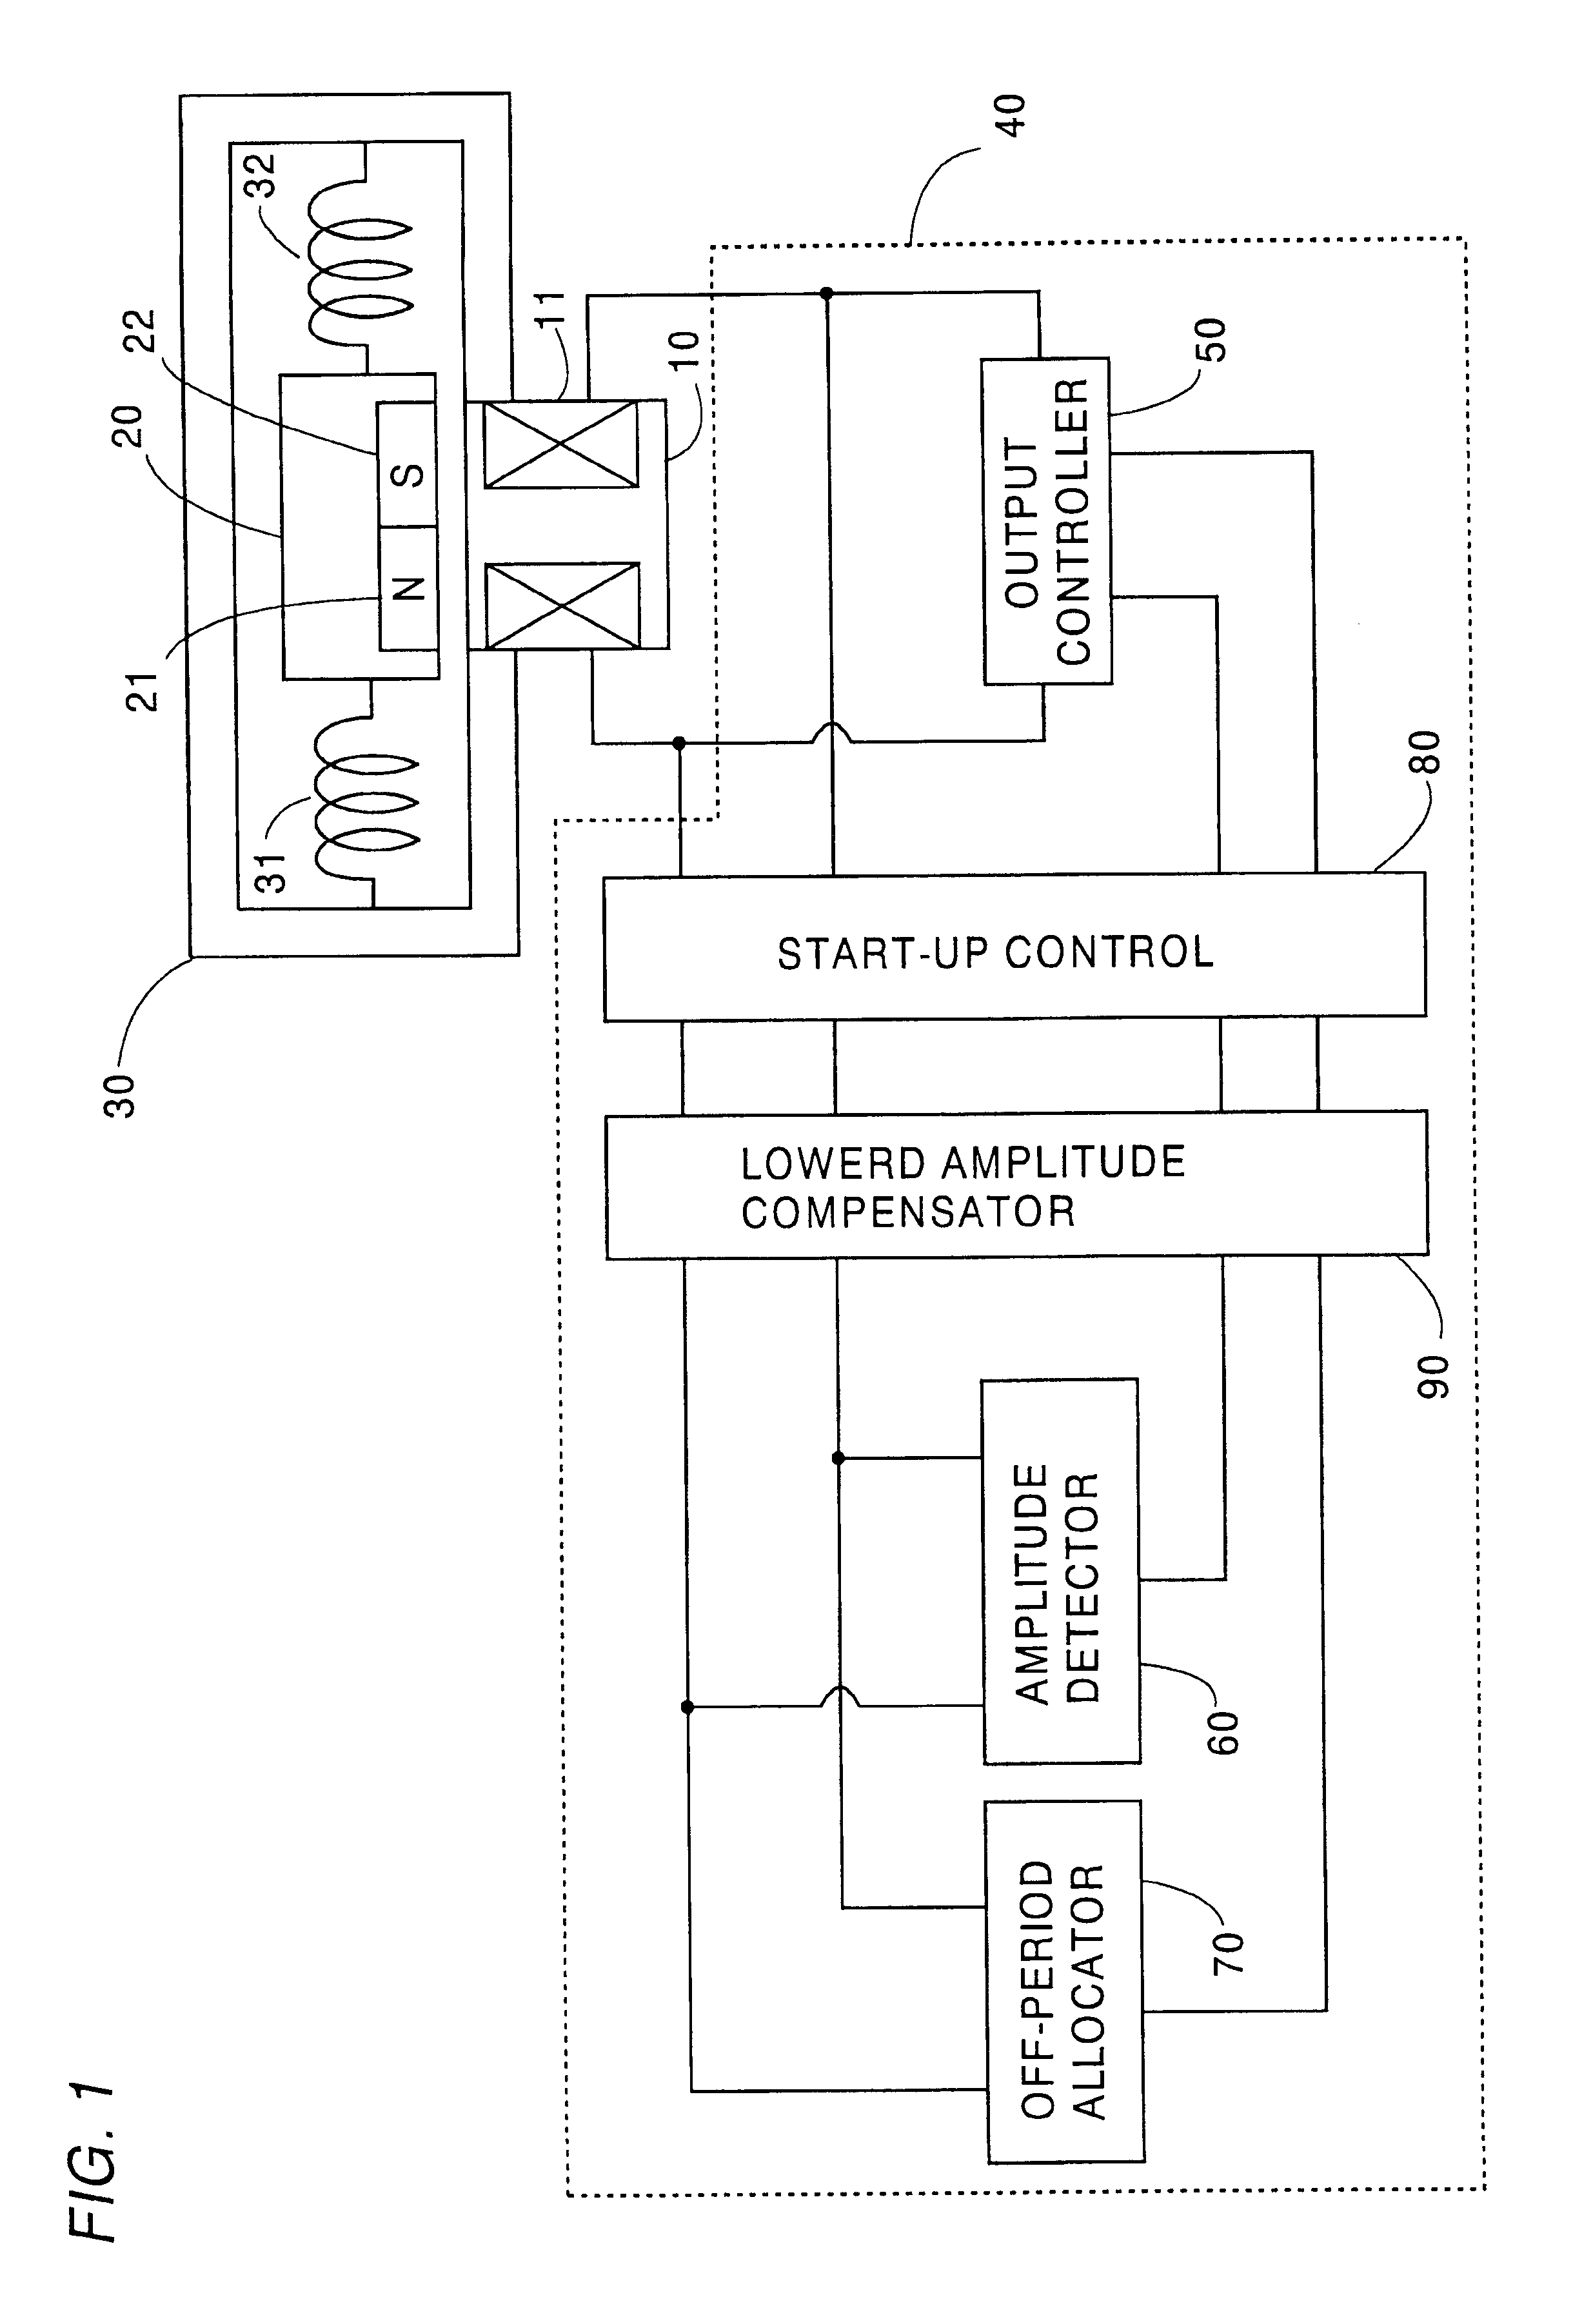 Control system for a linear vibration motor